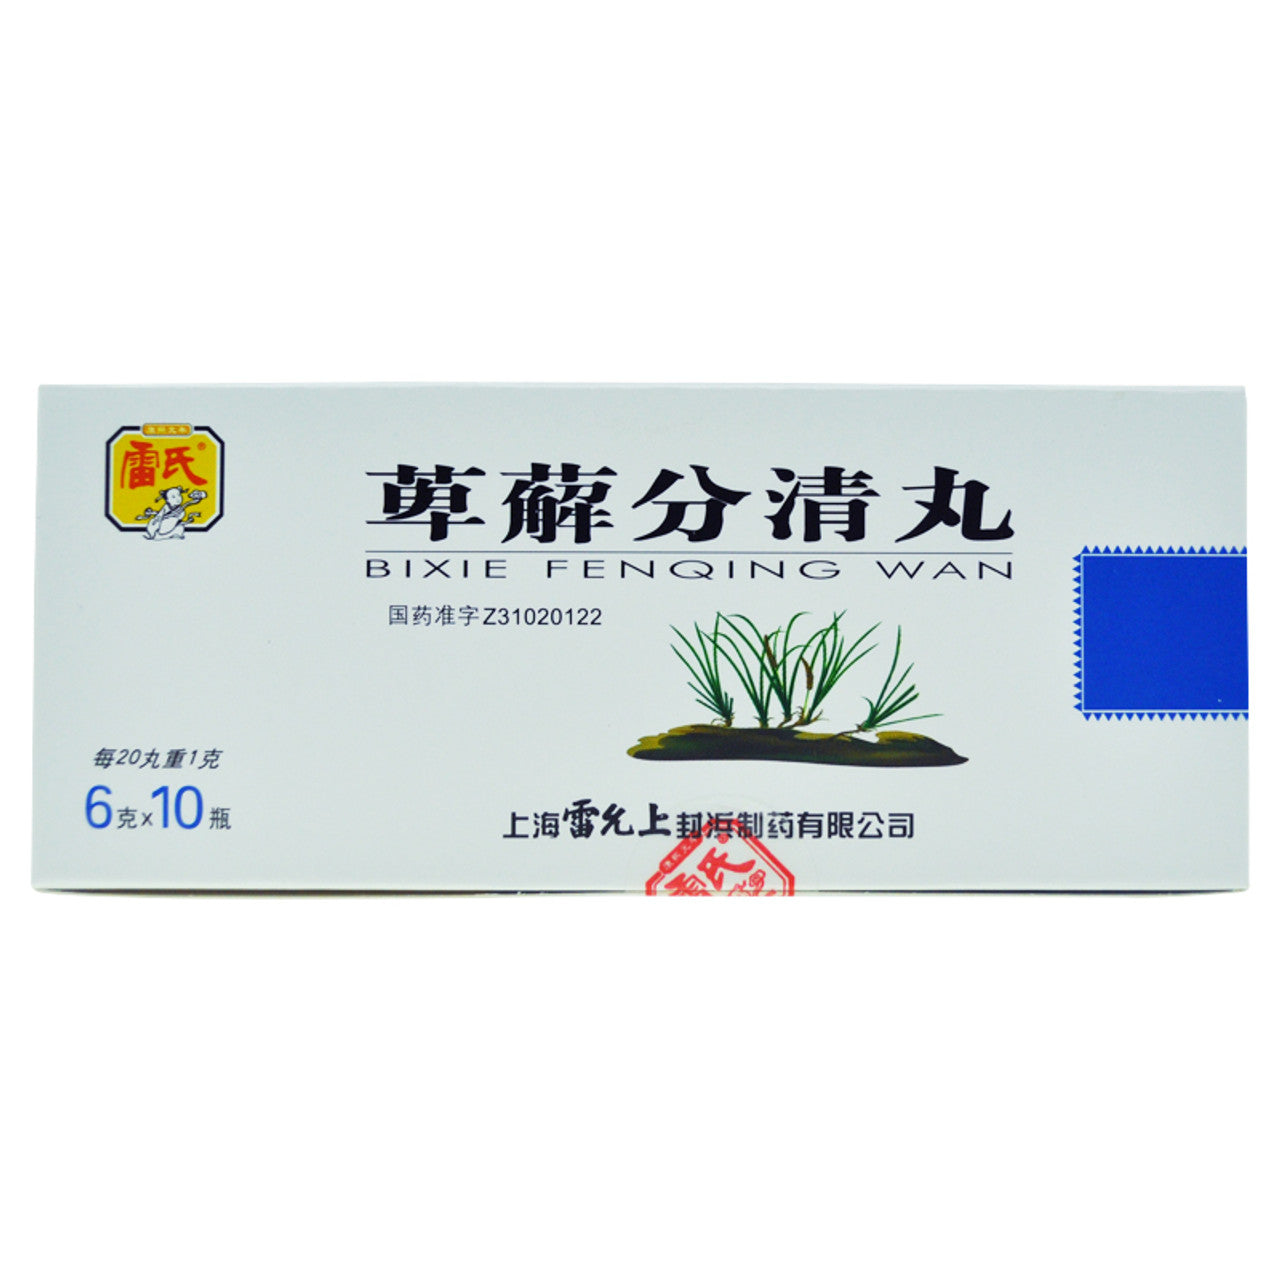 Chinese Herbs. Brand LEISHE. BIXIEFENQINGWAN or Bixie Fenqing Wan or Bixie Fenqing Pills or BiXieFenQingWan or Bi Xie Fen Qing Wan or Bi Xie Fen Qing Pills For turbidity and frequent urination caused by kidney failure to clear qi and clear turbidity.